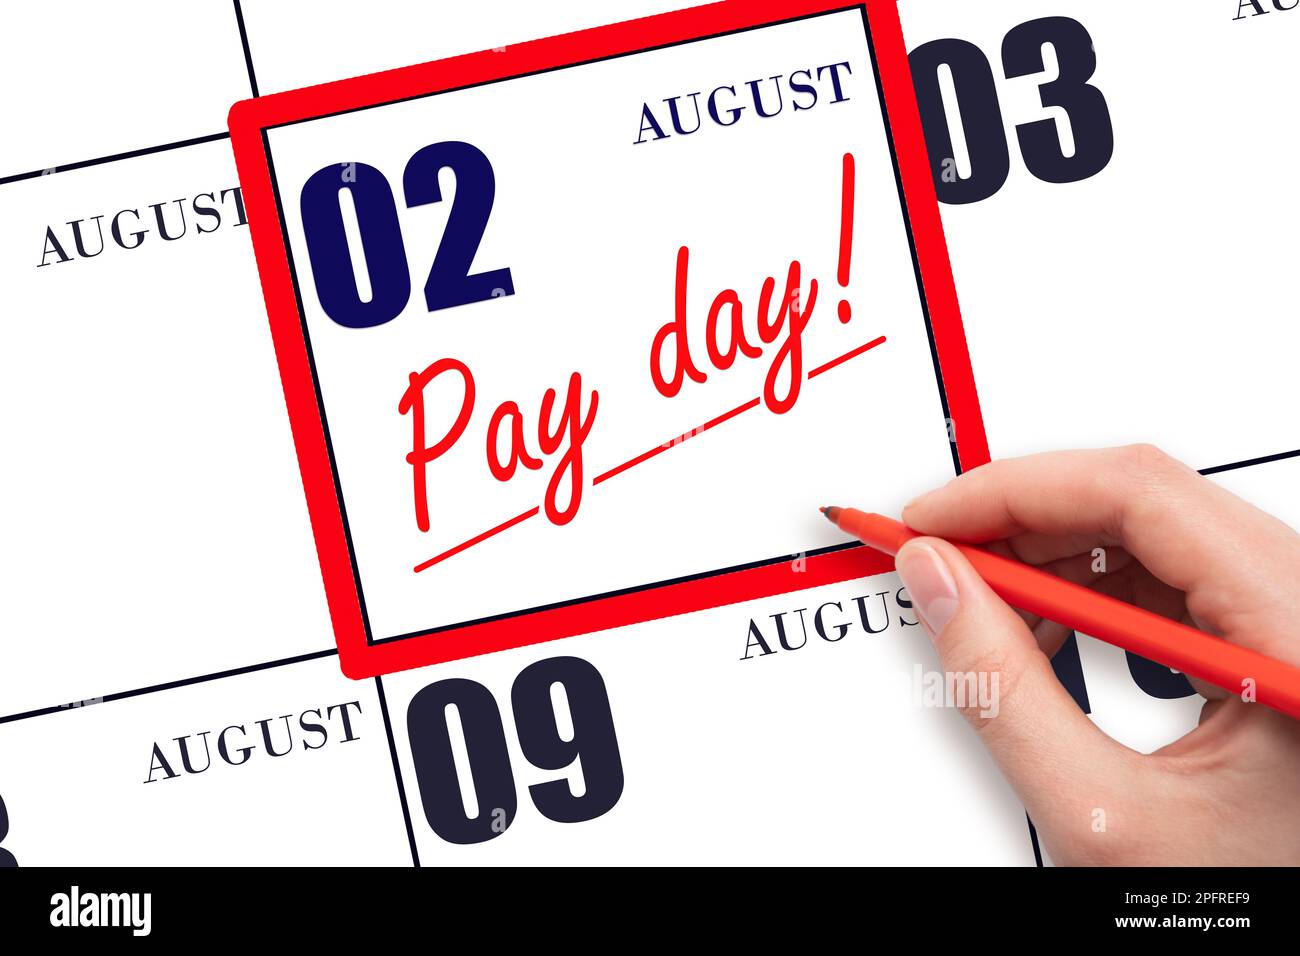 2nd day of August. Hand writing text PAY DATE on calendar date August 2 and underline it. Payment due date.  Reminder concept of payment. Summer month Stock Photo